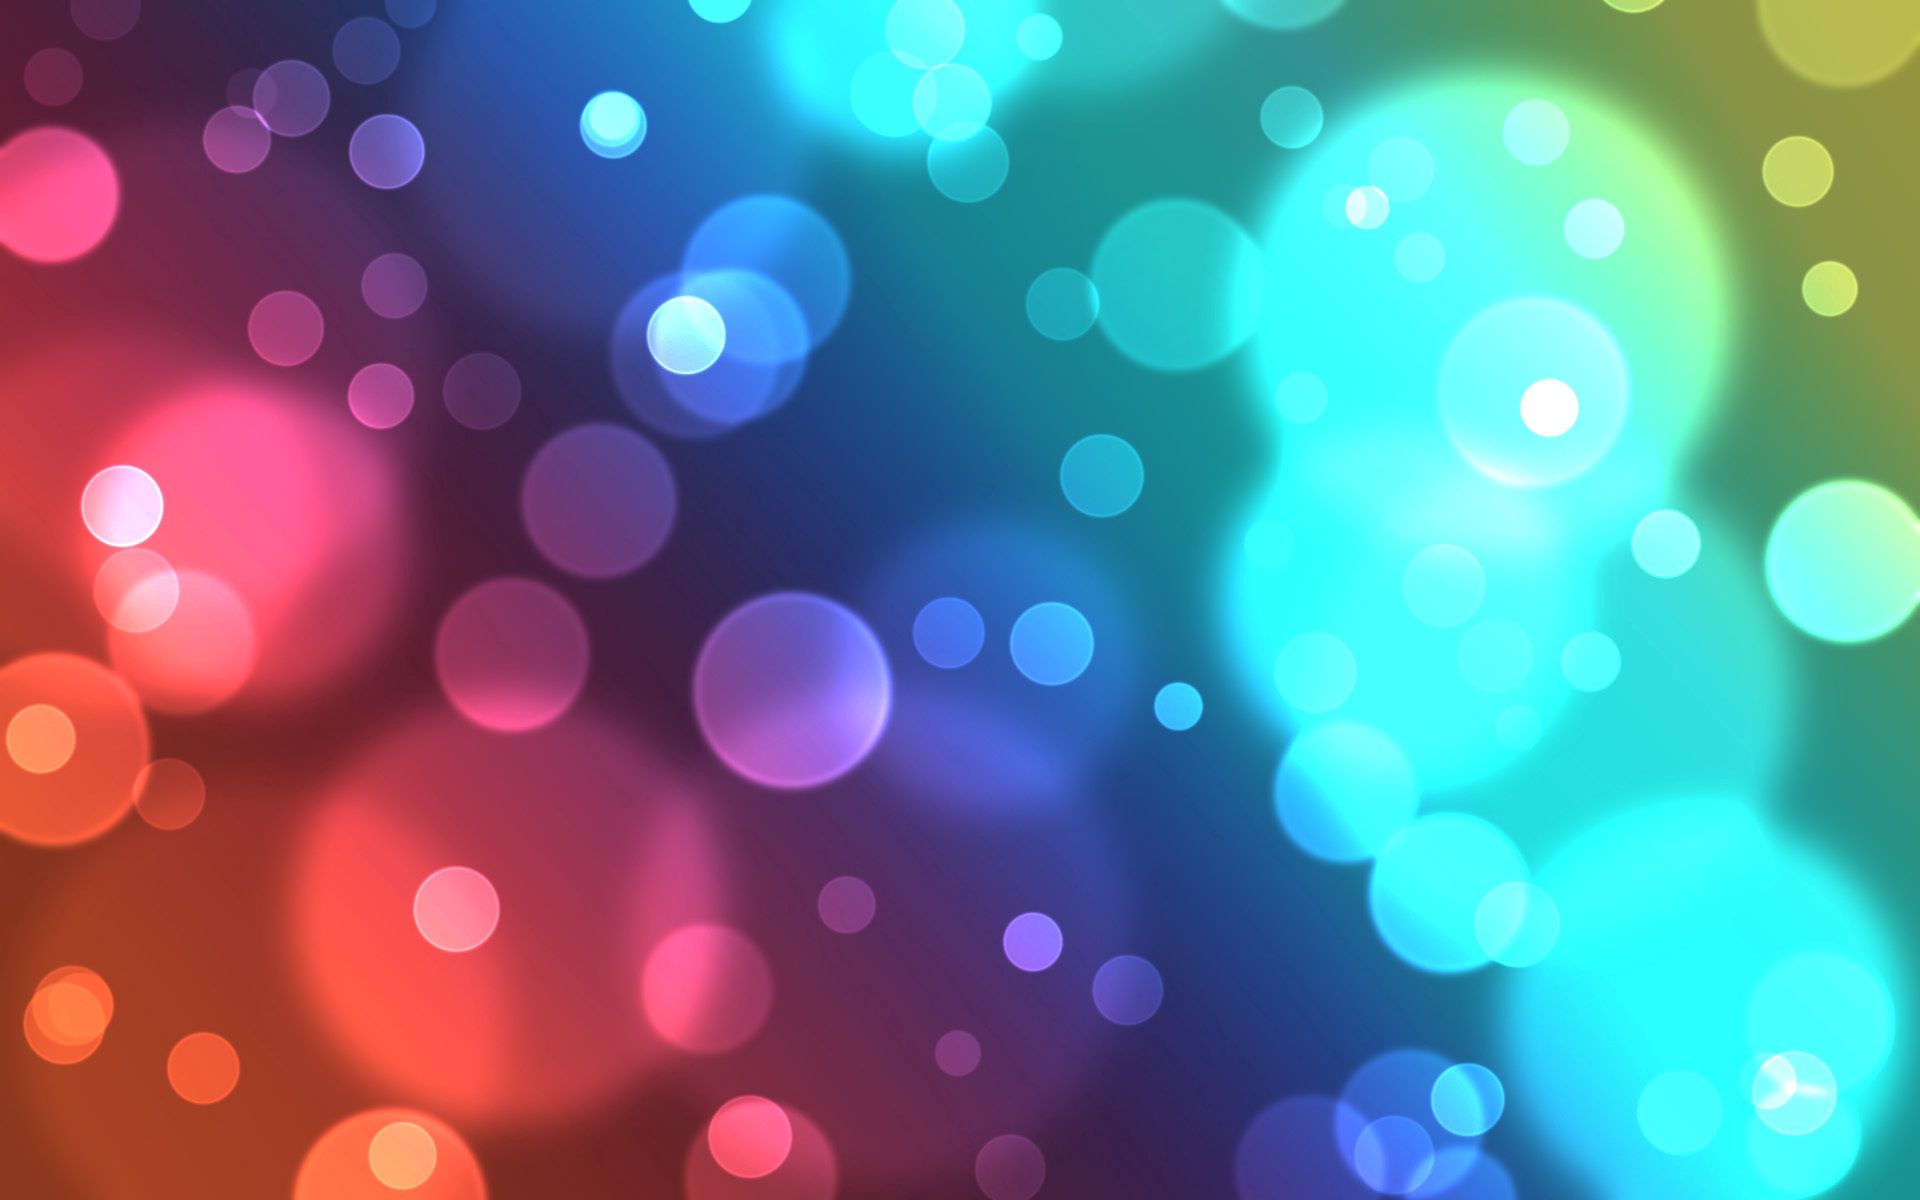 motley, multicolored, abstract, background, glare, circles, bright for android